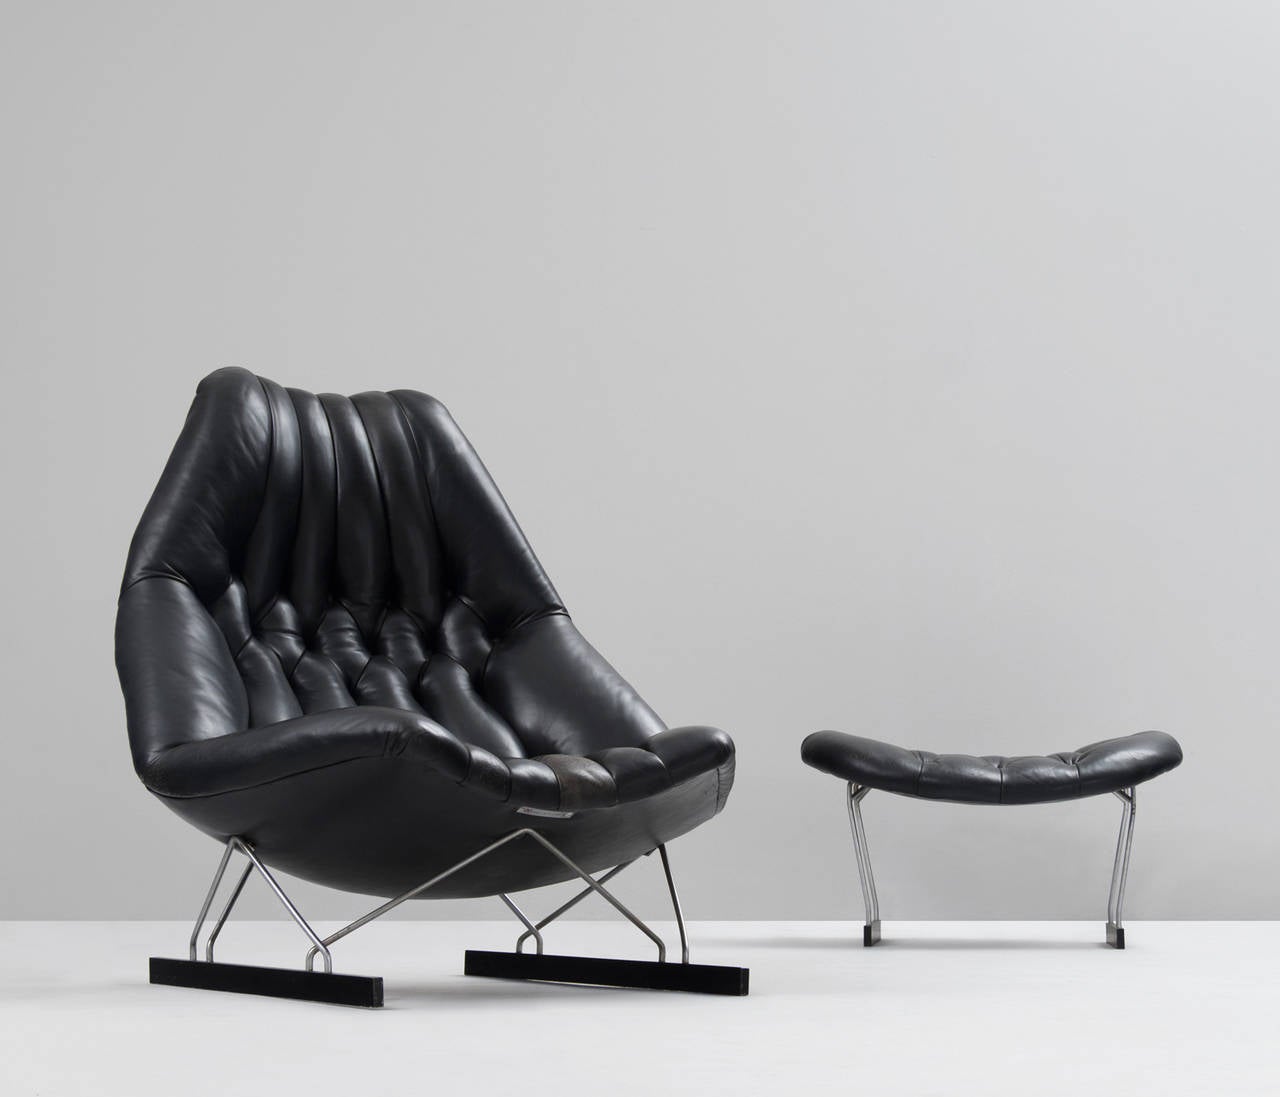 Geoffrey Harcourt for Artifort, lounge chair and ottoman, metal and black leather, the Netherlands, 1960s. 

This black leather lounge chair is designed by Geoffrey Harcourt for Artifort. The open, linear design of the chrome and black metal base,